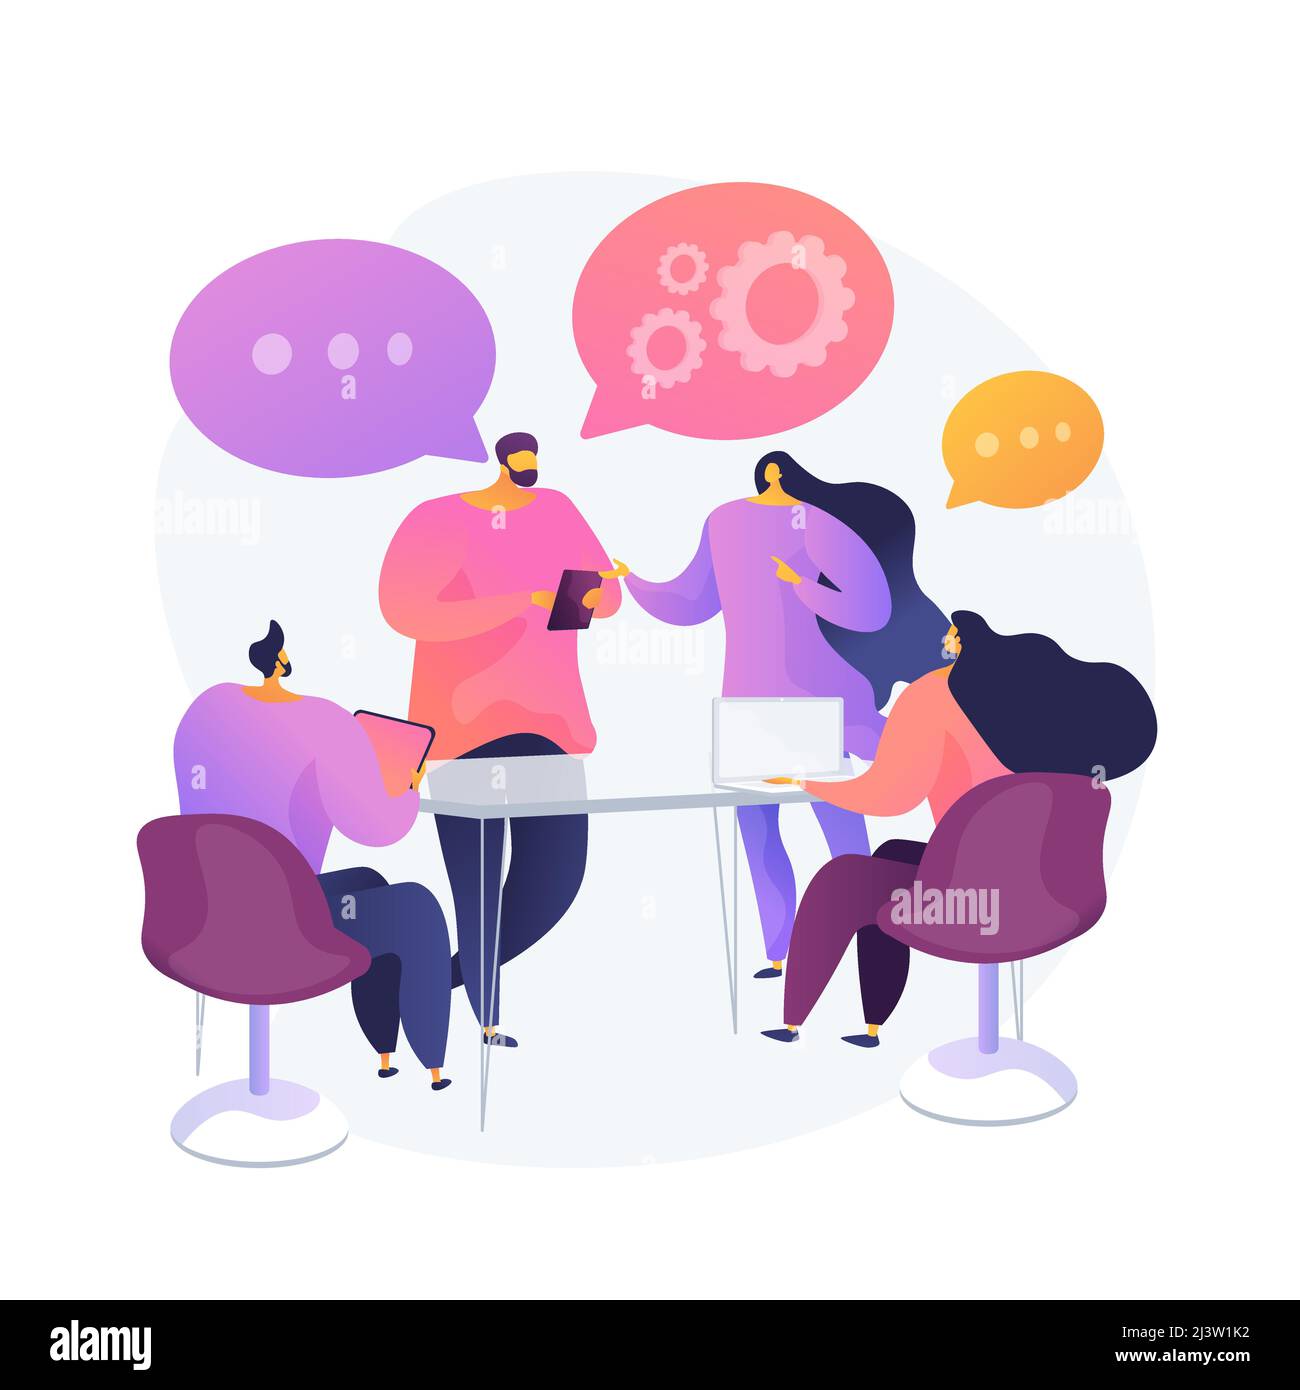 Cooperation and collaboration at work. Business meeting, coworkers briefing, employees teamwork. Colleagues in conference room discussing project. Vec Stock Vector